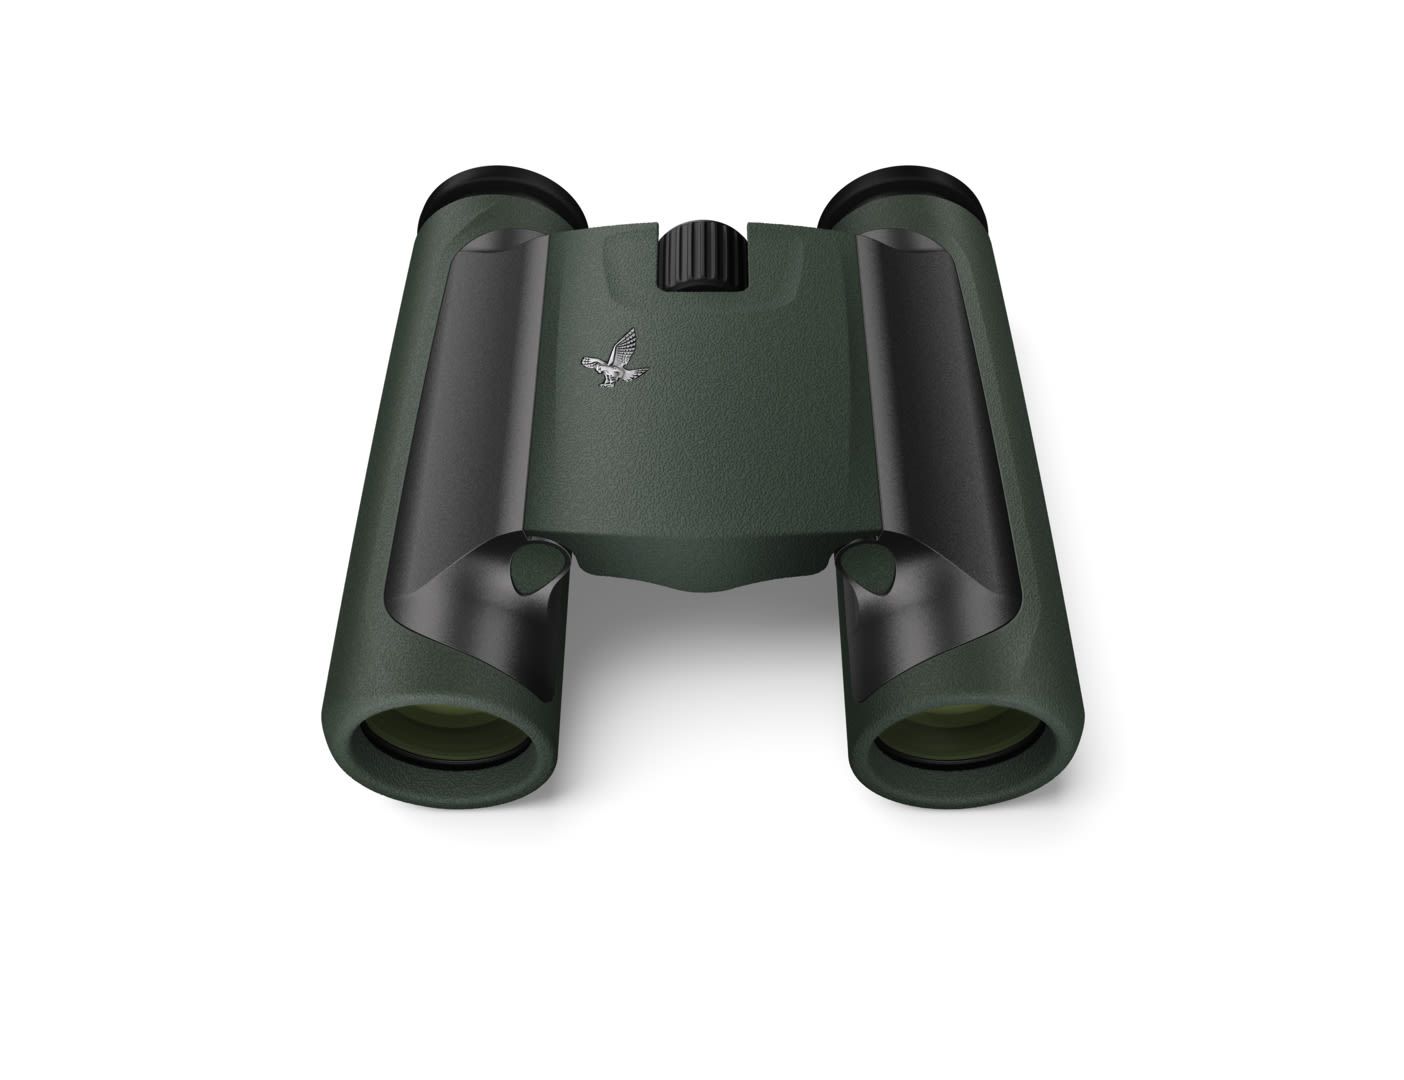 Swarovski CL 10x25 Pocket Binoculars Green with Wild Nature Accessory Pack - Top down view